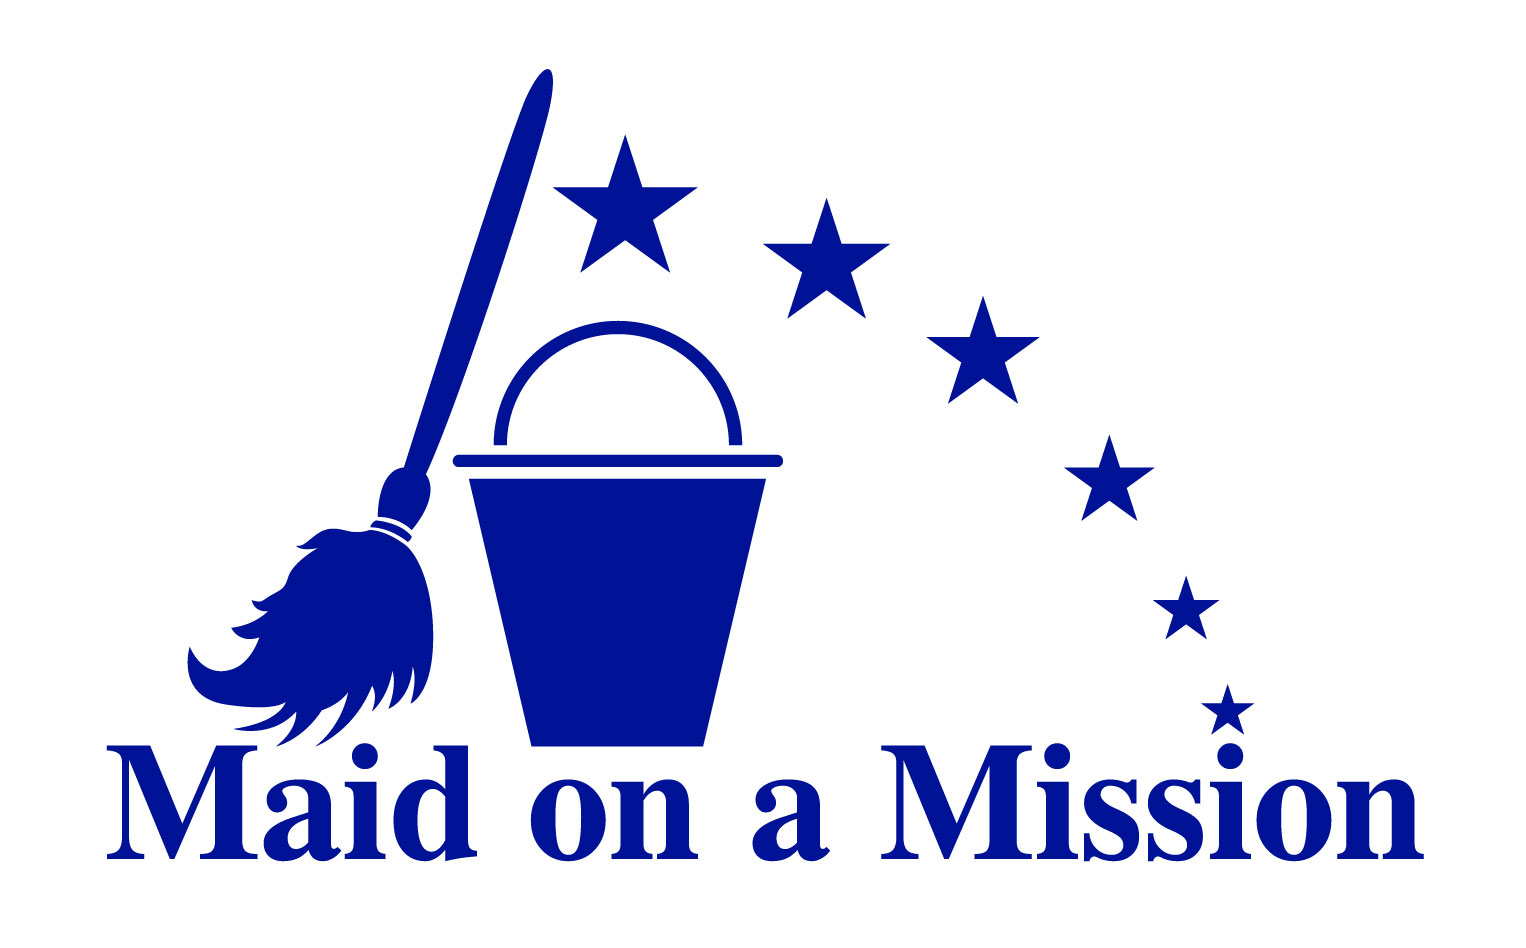 Logo of Maid on a Mission limited